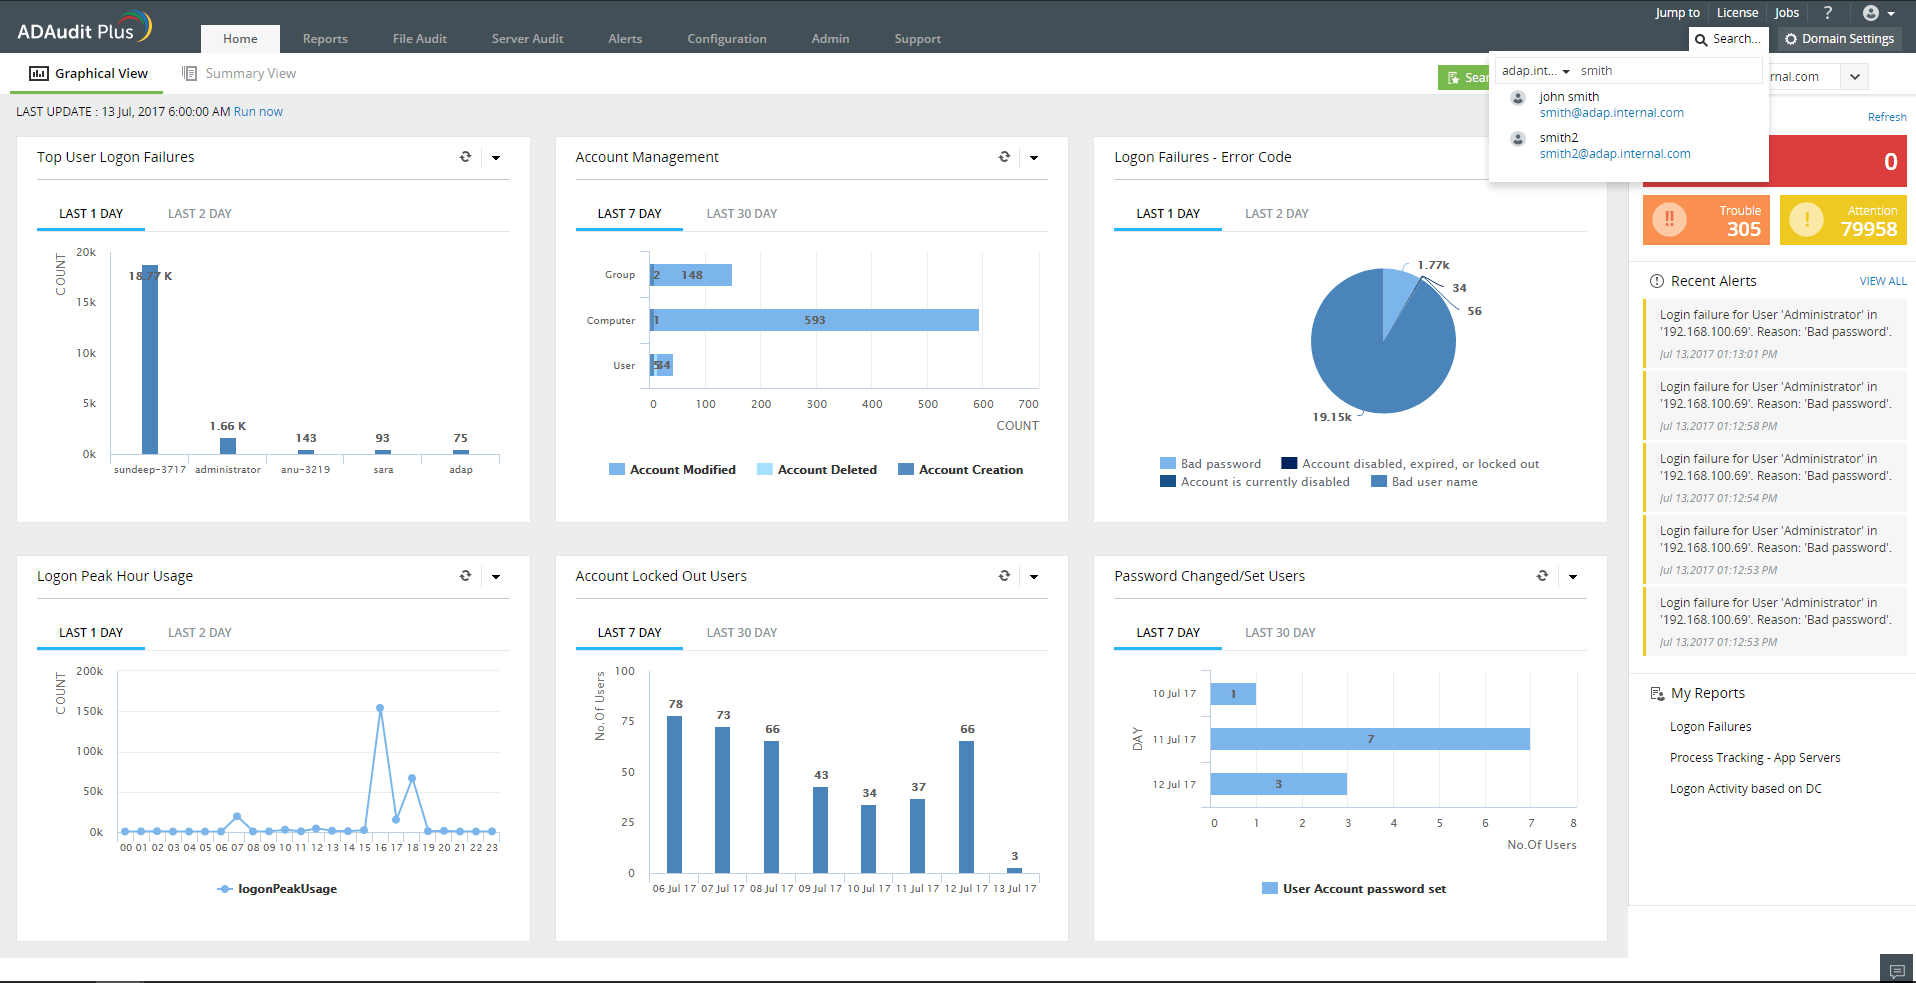 aggregate-reports-user-management-reports-dashboard-view